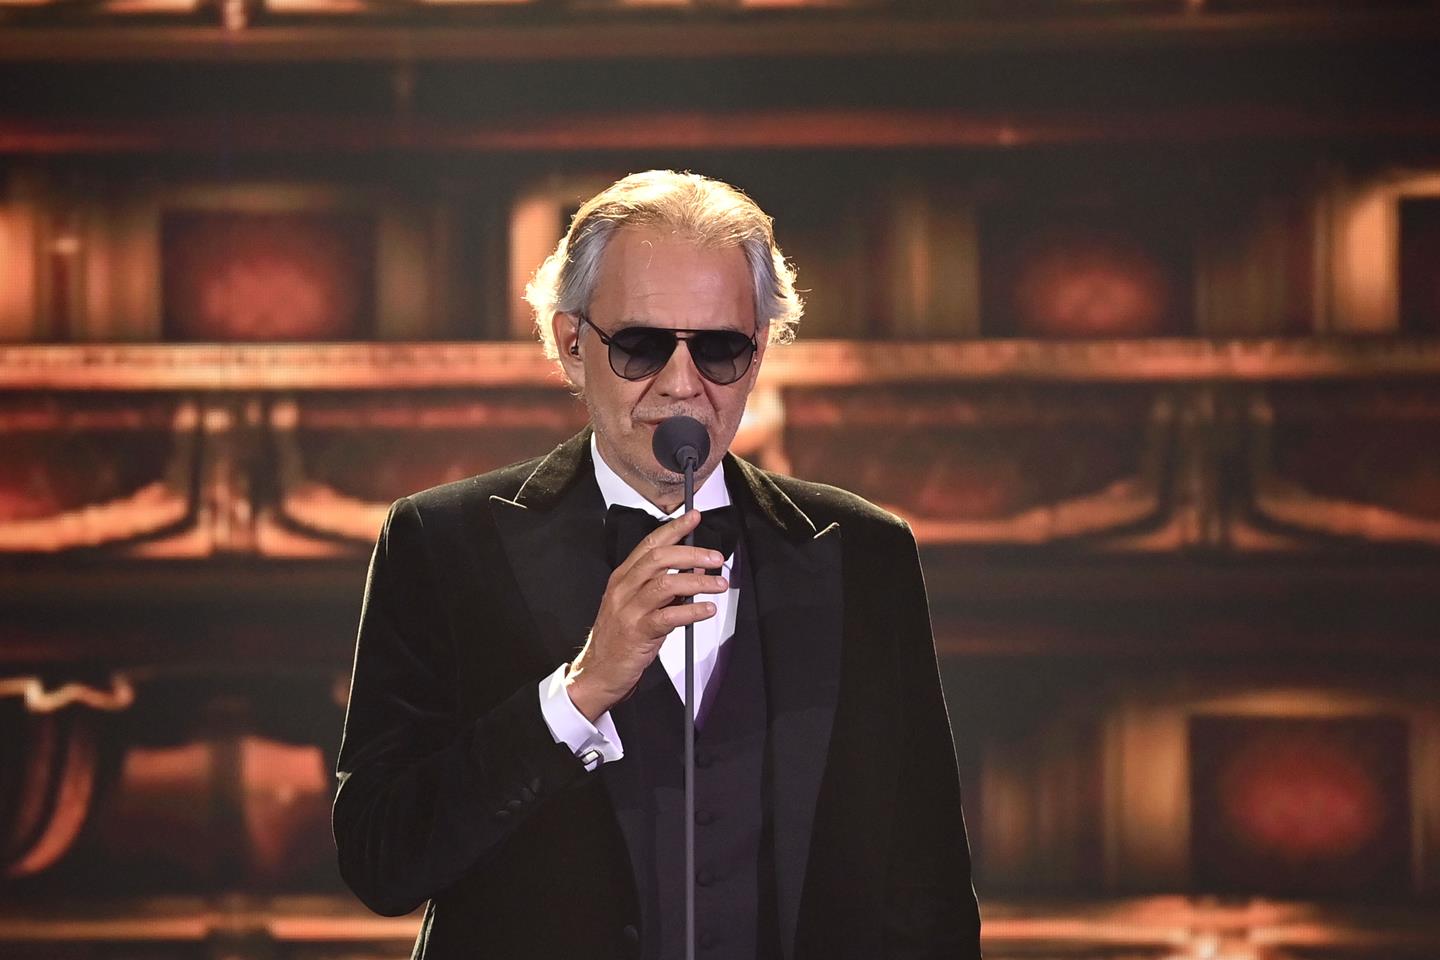 Andrea Bocelli Tickets | Andrea Bocelli Tour 2018 and Concert Tickets ...